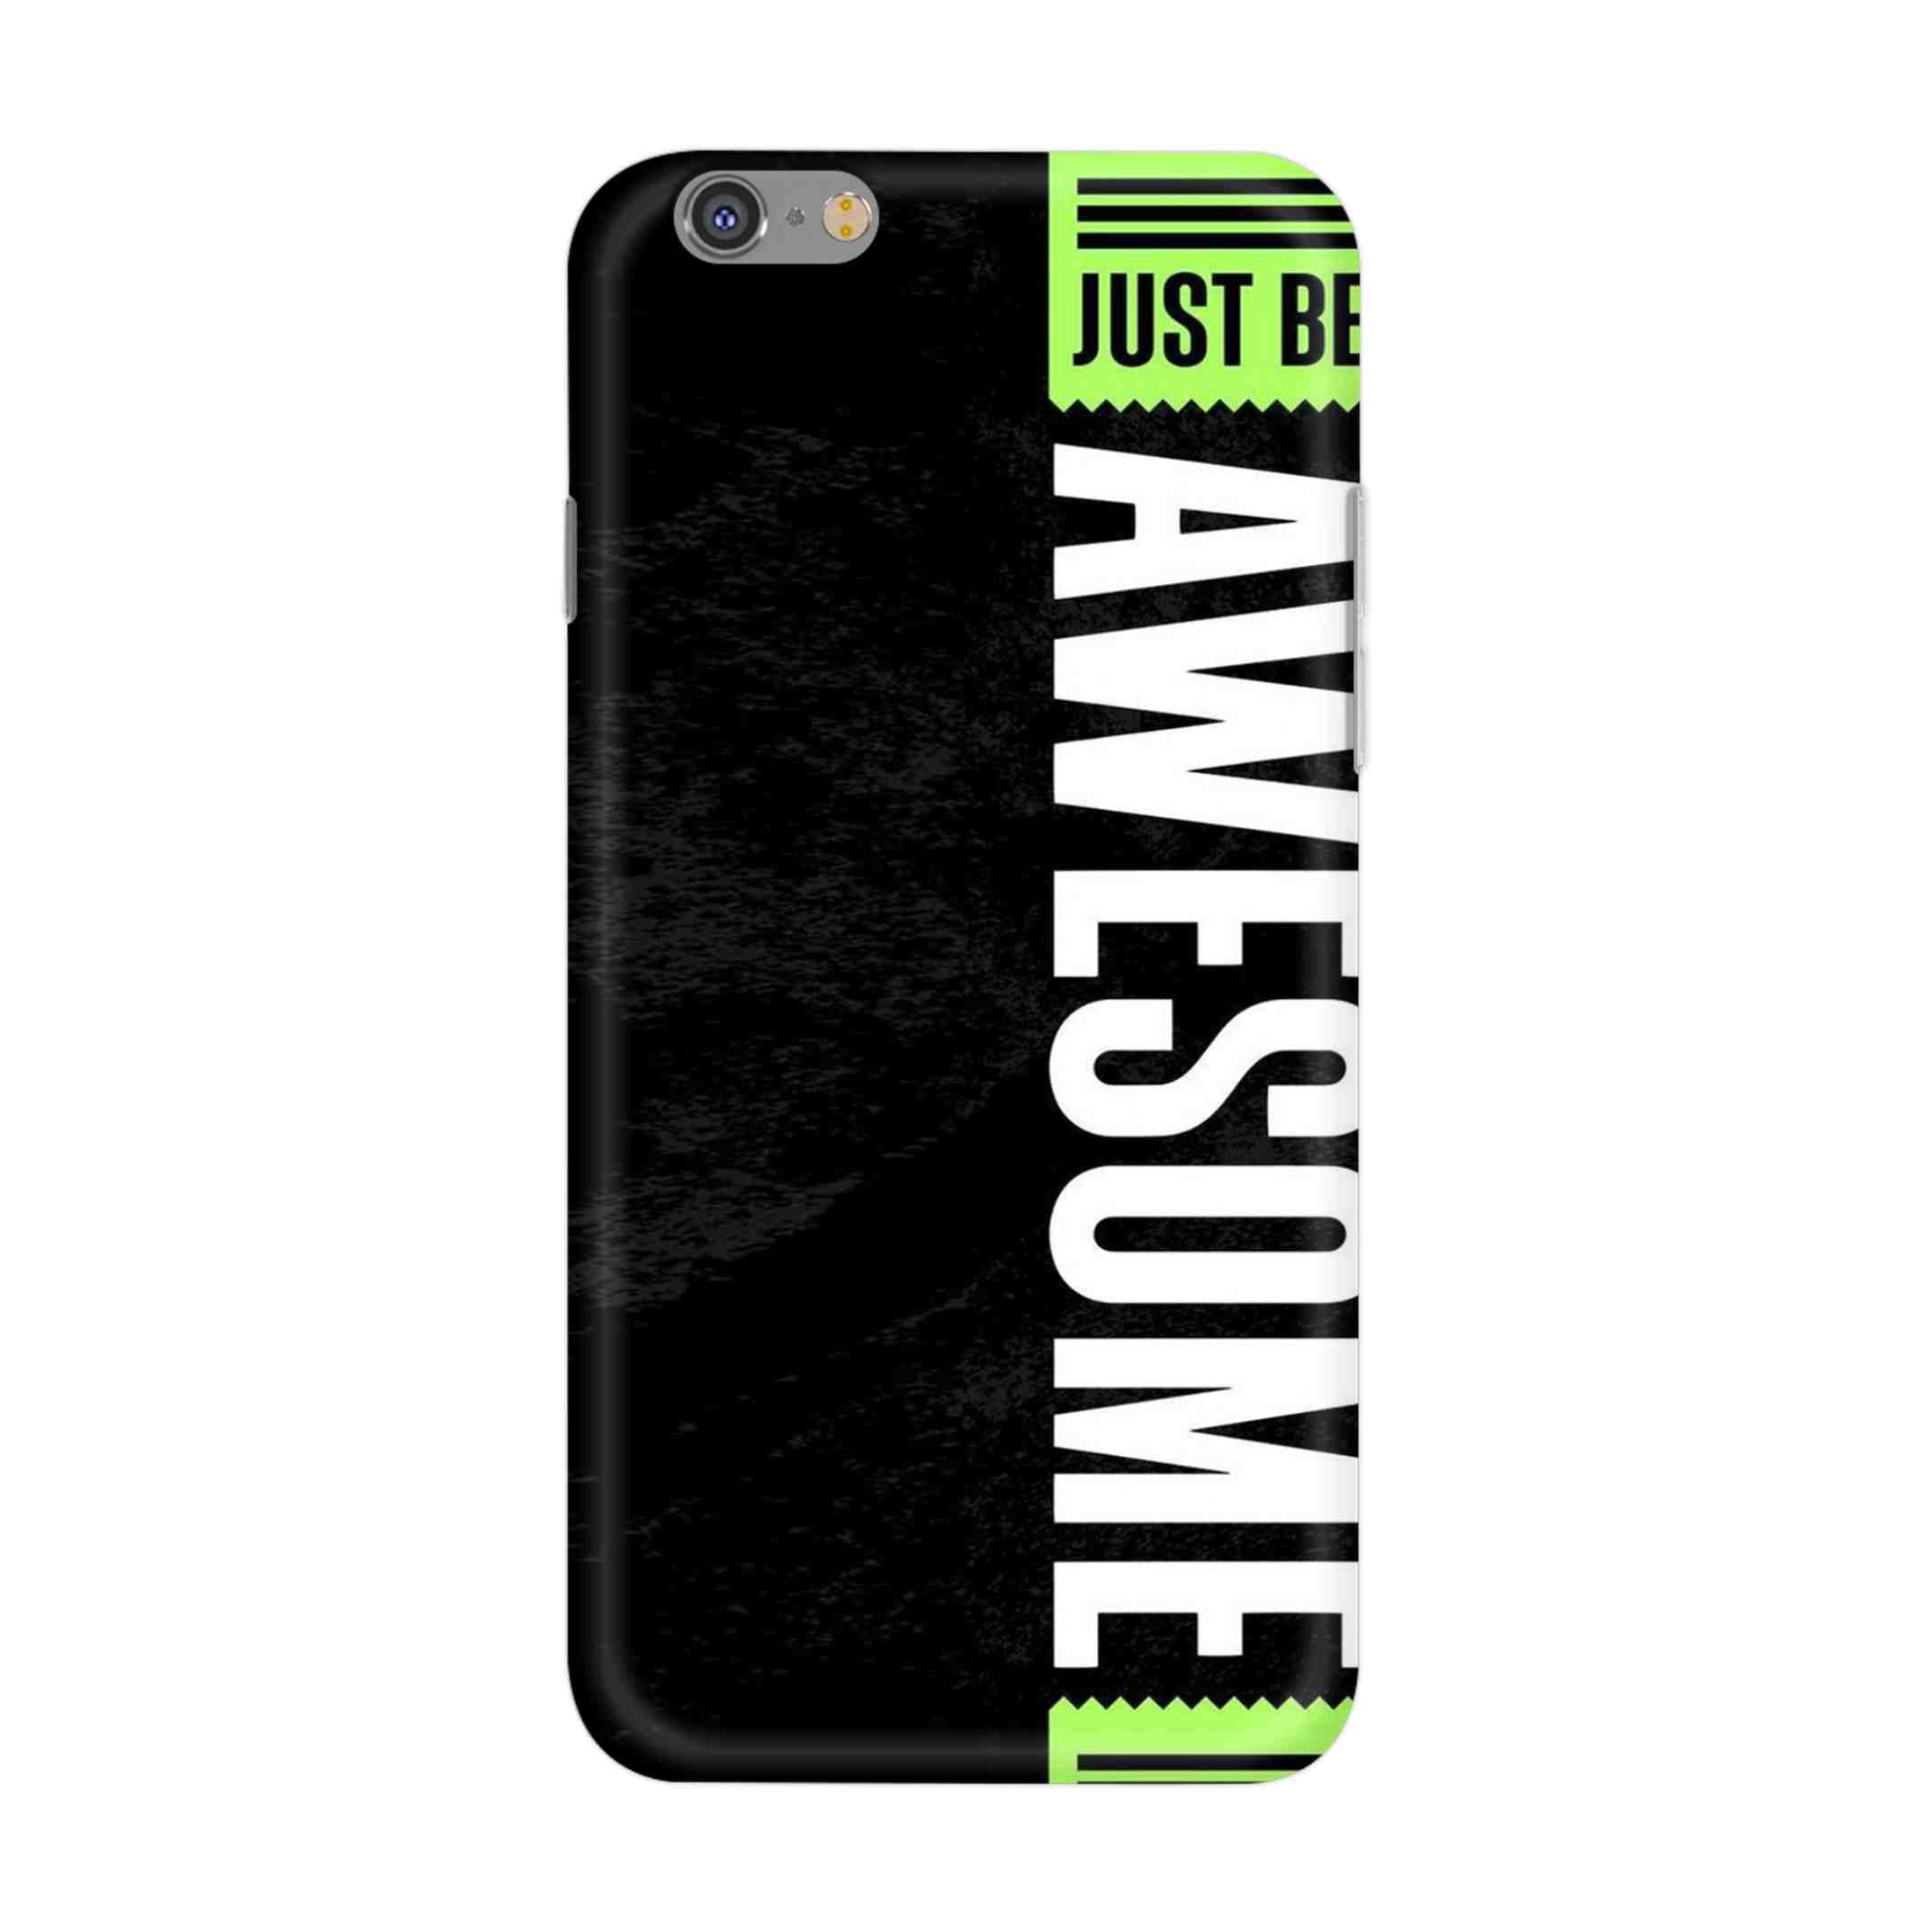 Buy Awesome Street Hard Back Mobile Phone Case/Cover For iPhone 6 / 6s Online